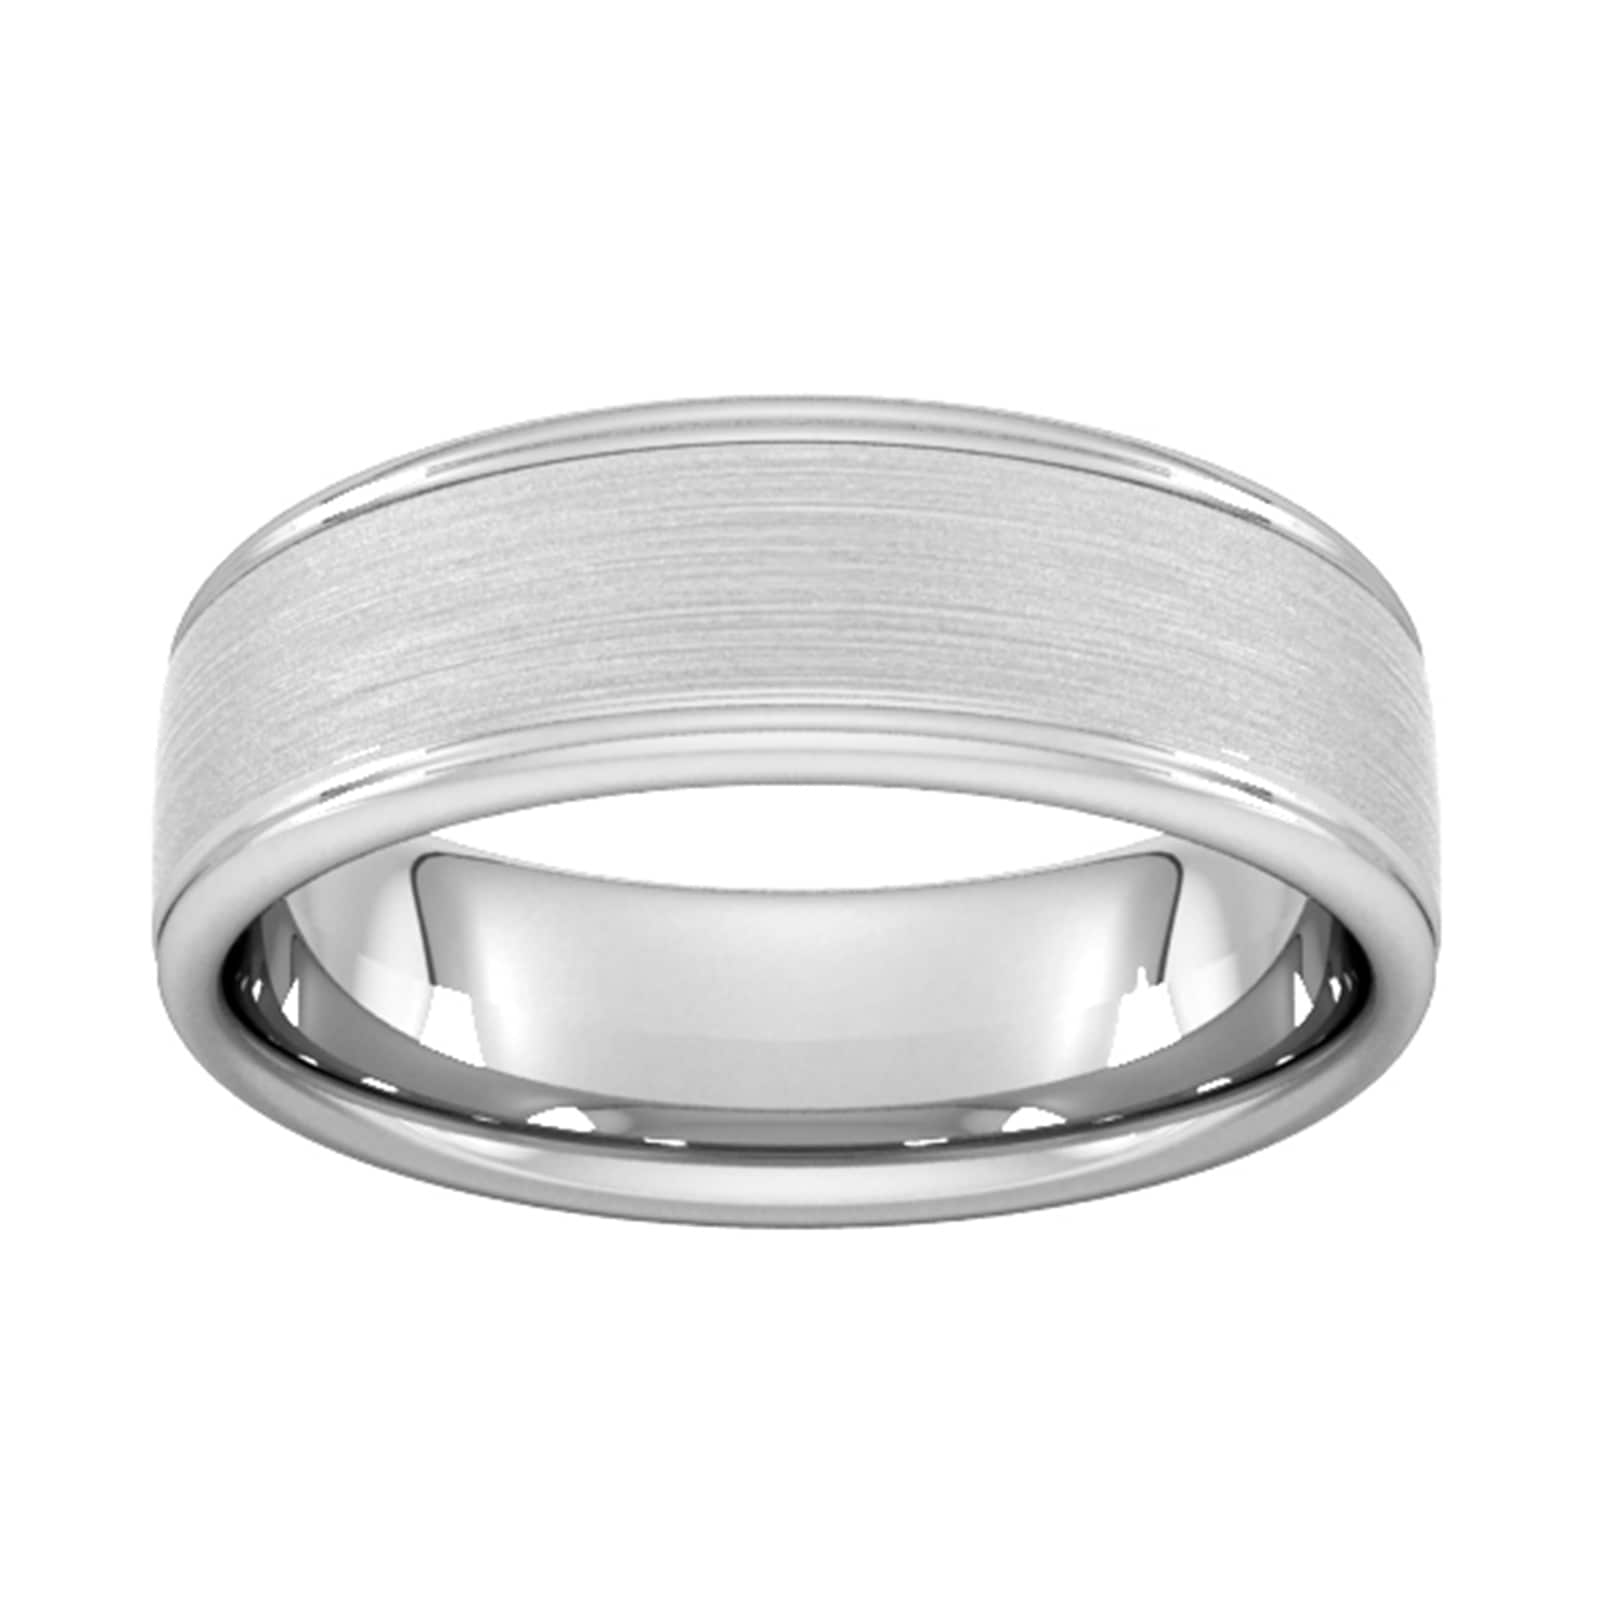 7mm Traditional Court Heavy Matt Centre With Grooves Wedding Ring In 950 Palladium - Ring Size O